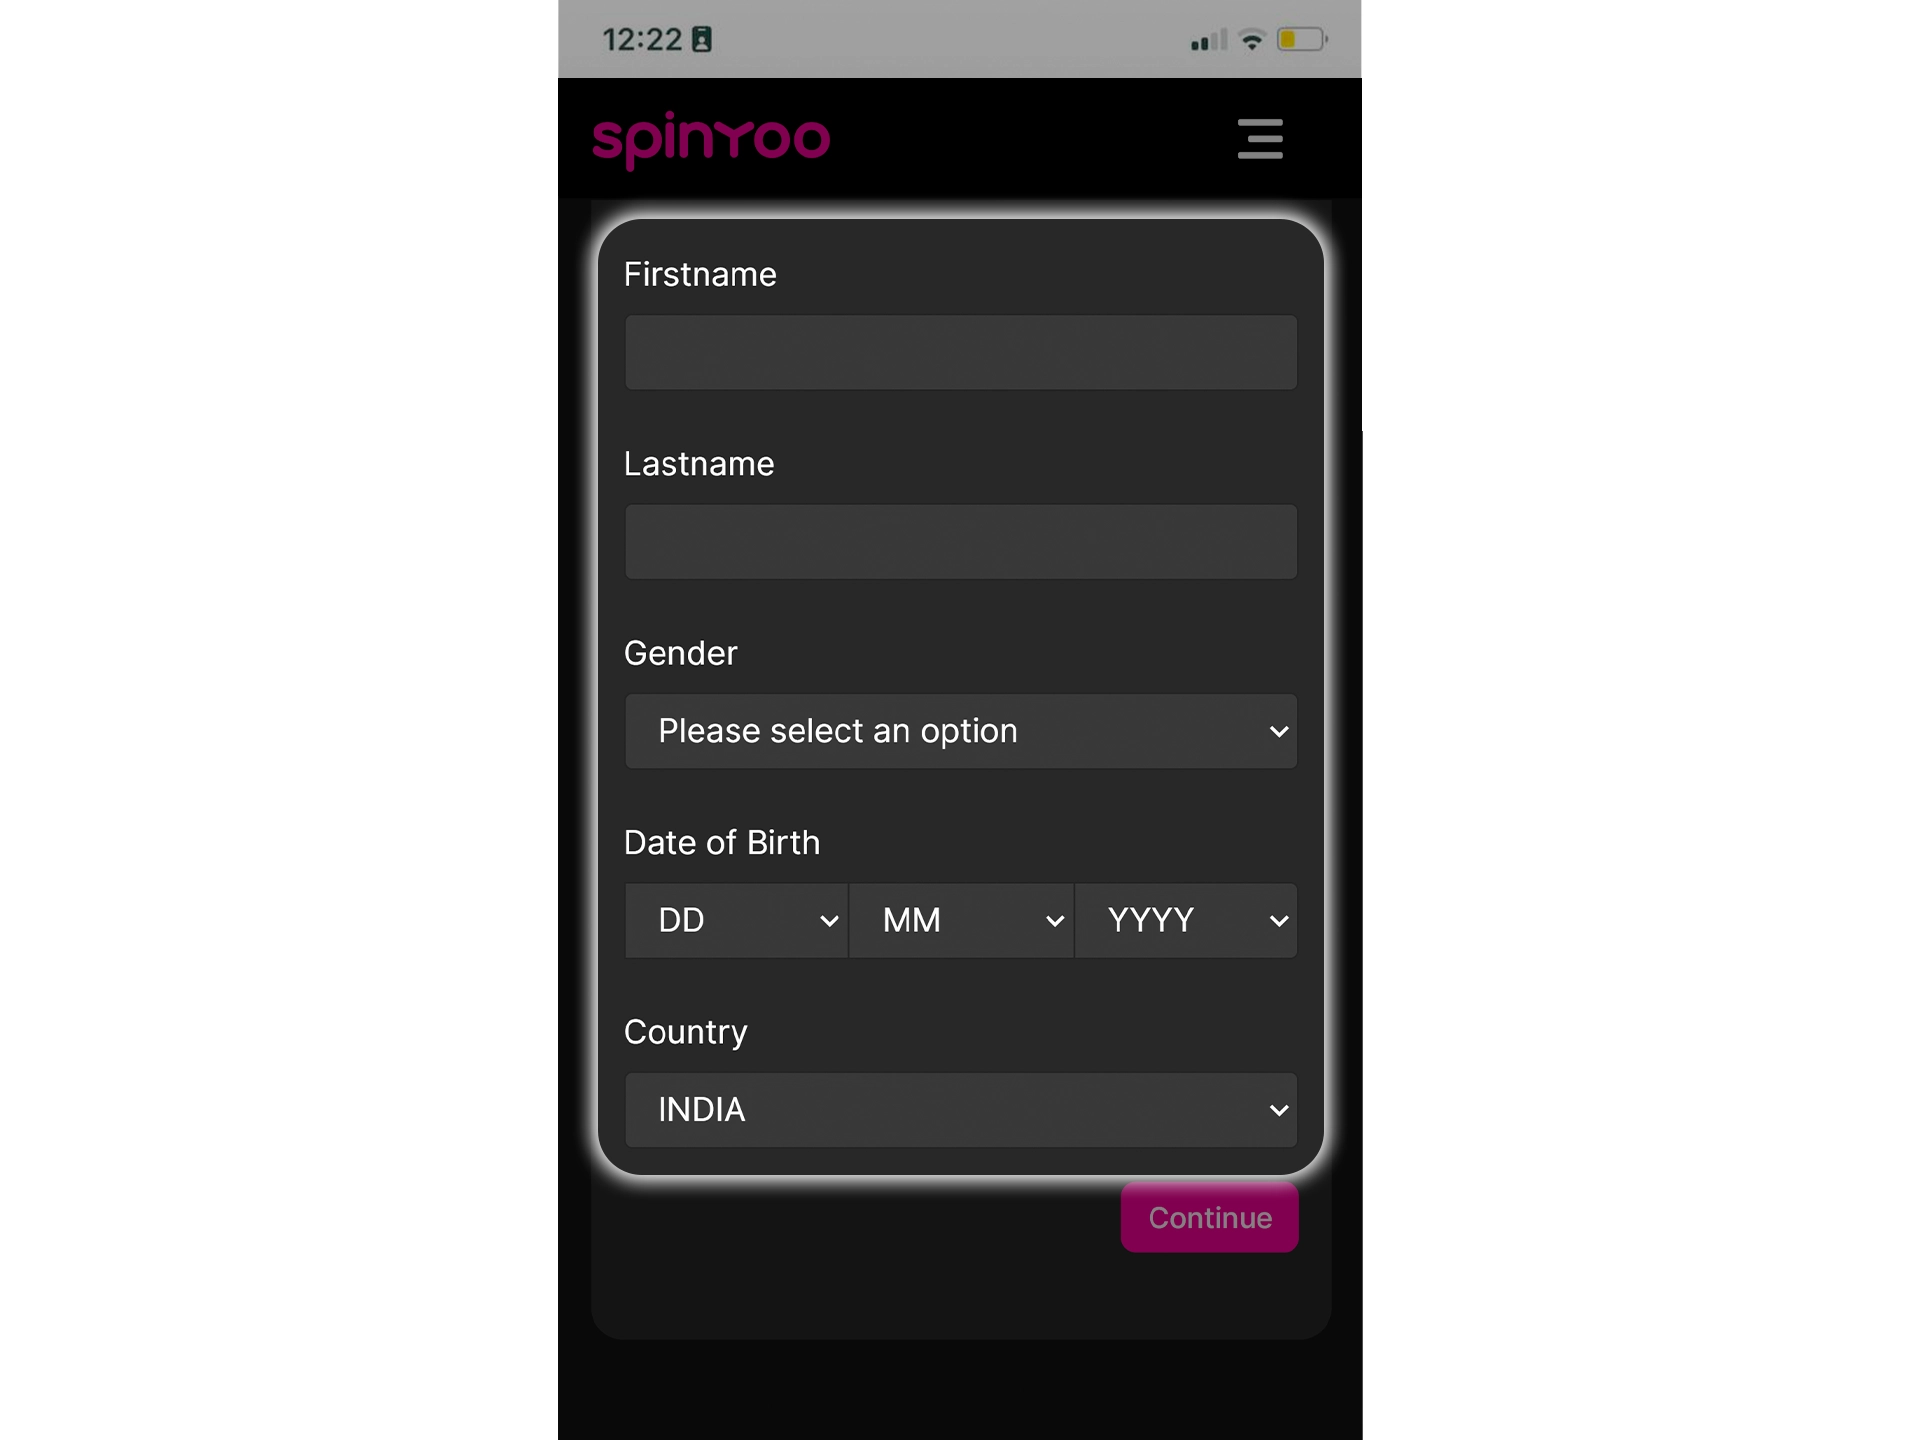 Enter the details you need to create a Spinyoo account.